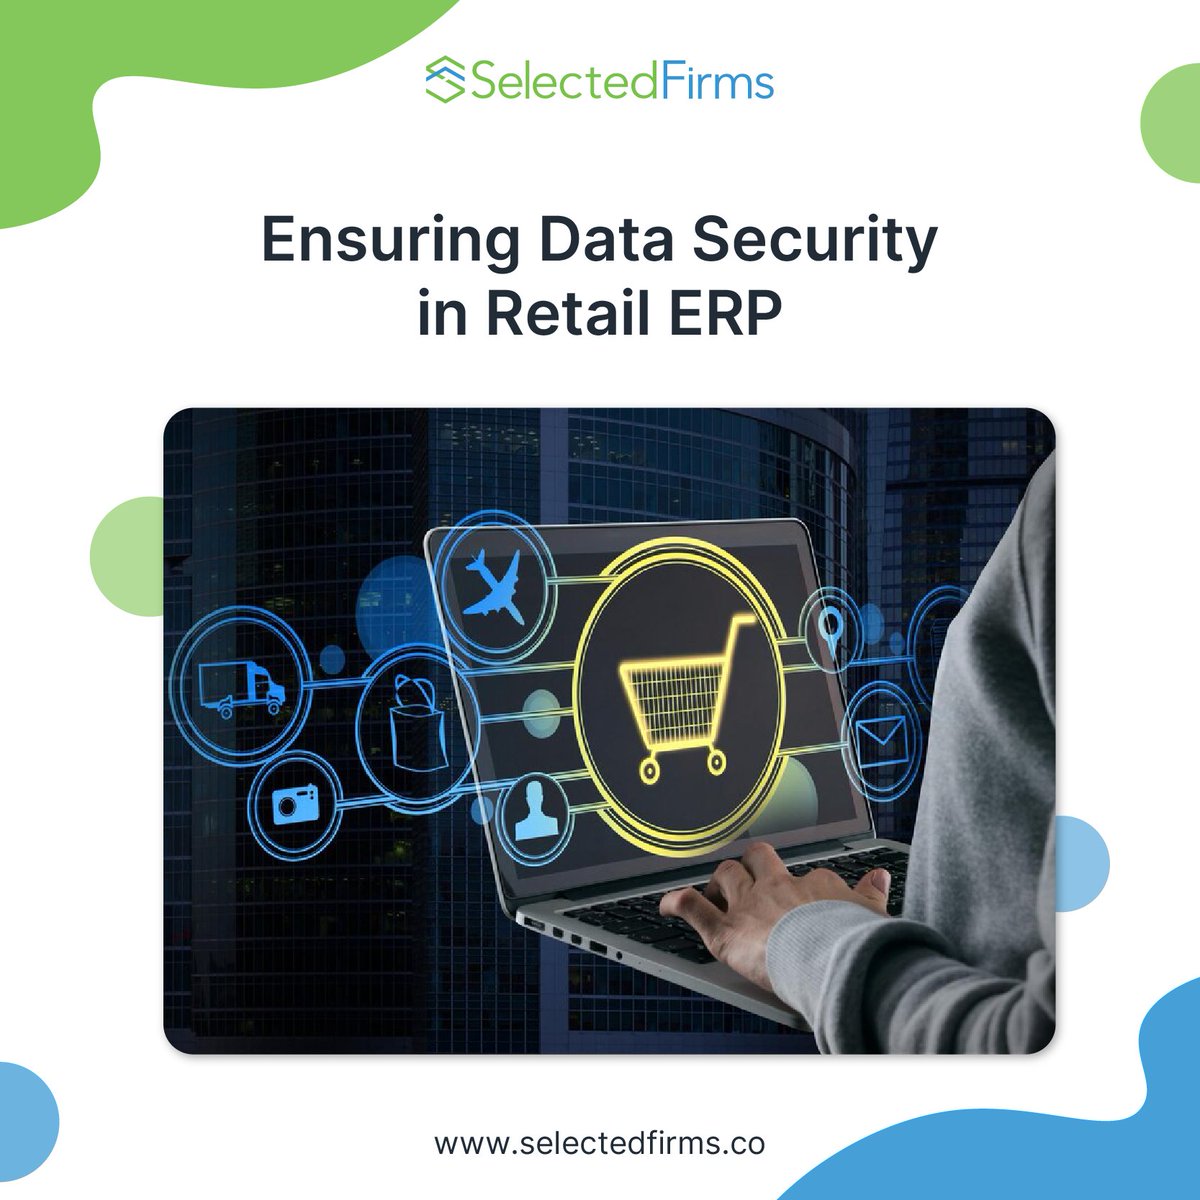 Check out your new guide in our latest blog on Ensuring Data Security in Retail ERP- bit.ly/43czUyS

#selectedfirms #datasecurity #erp #data #securityawareness #enterpriseresourceplanning